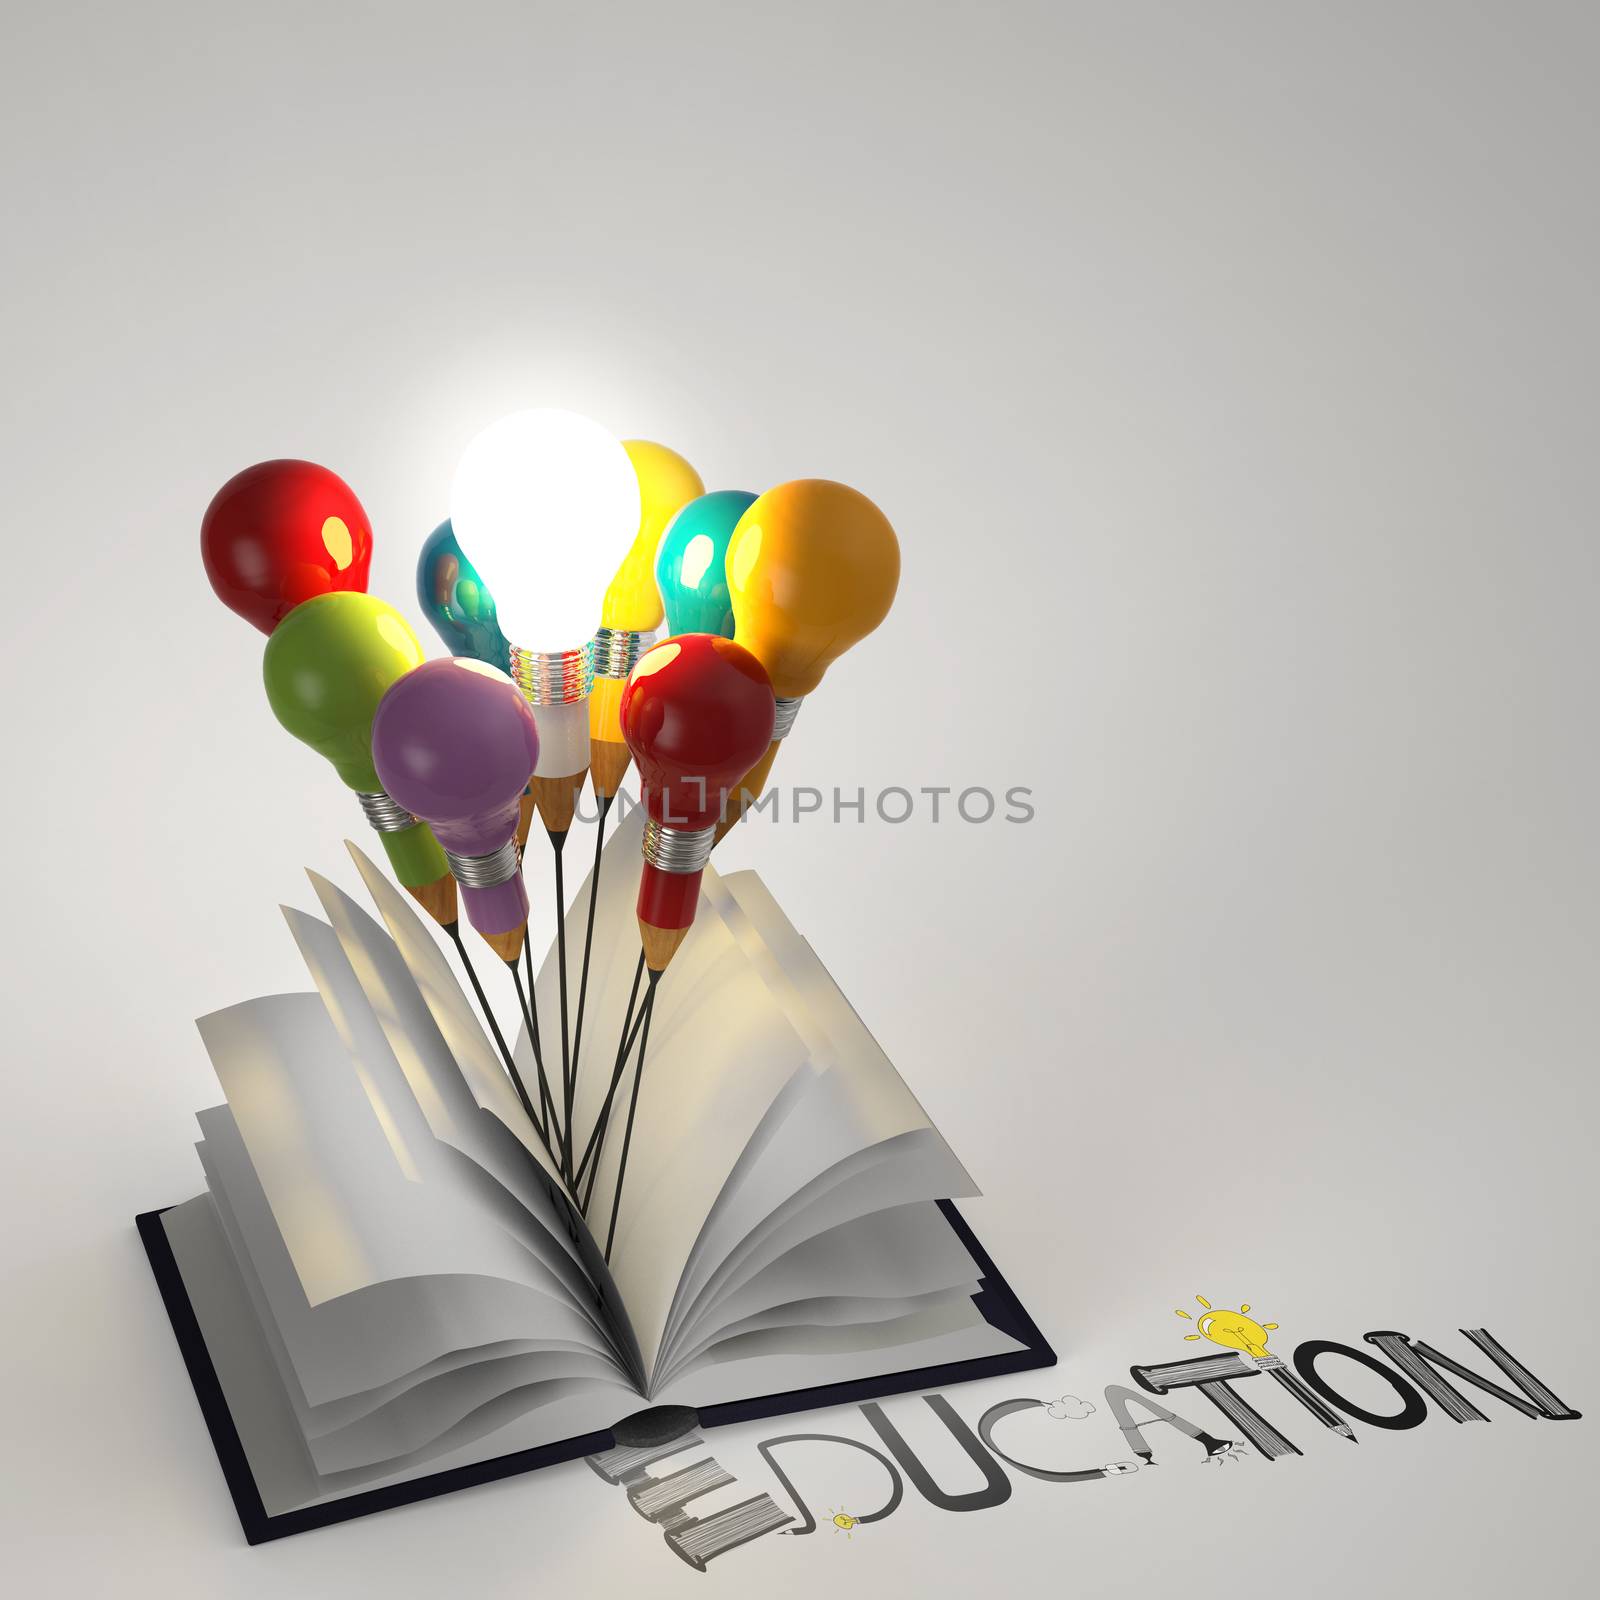 open book with pencil lightbulb 3d and design word EDUCATION as concept 